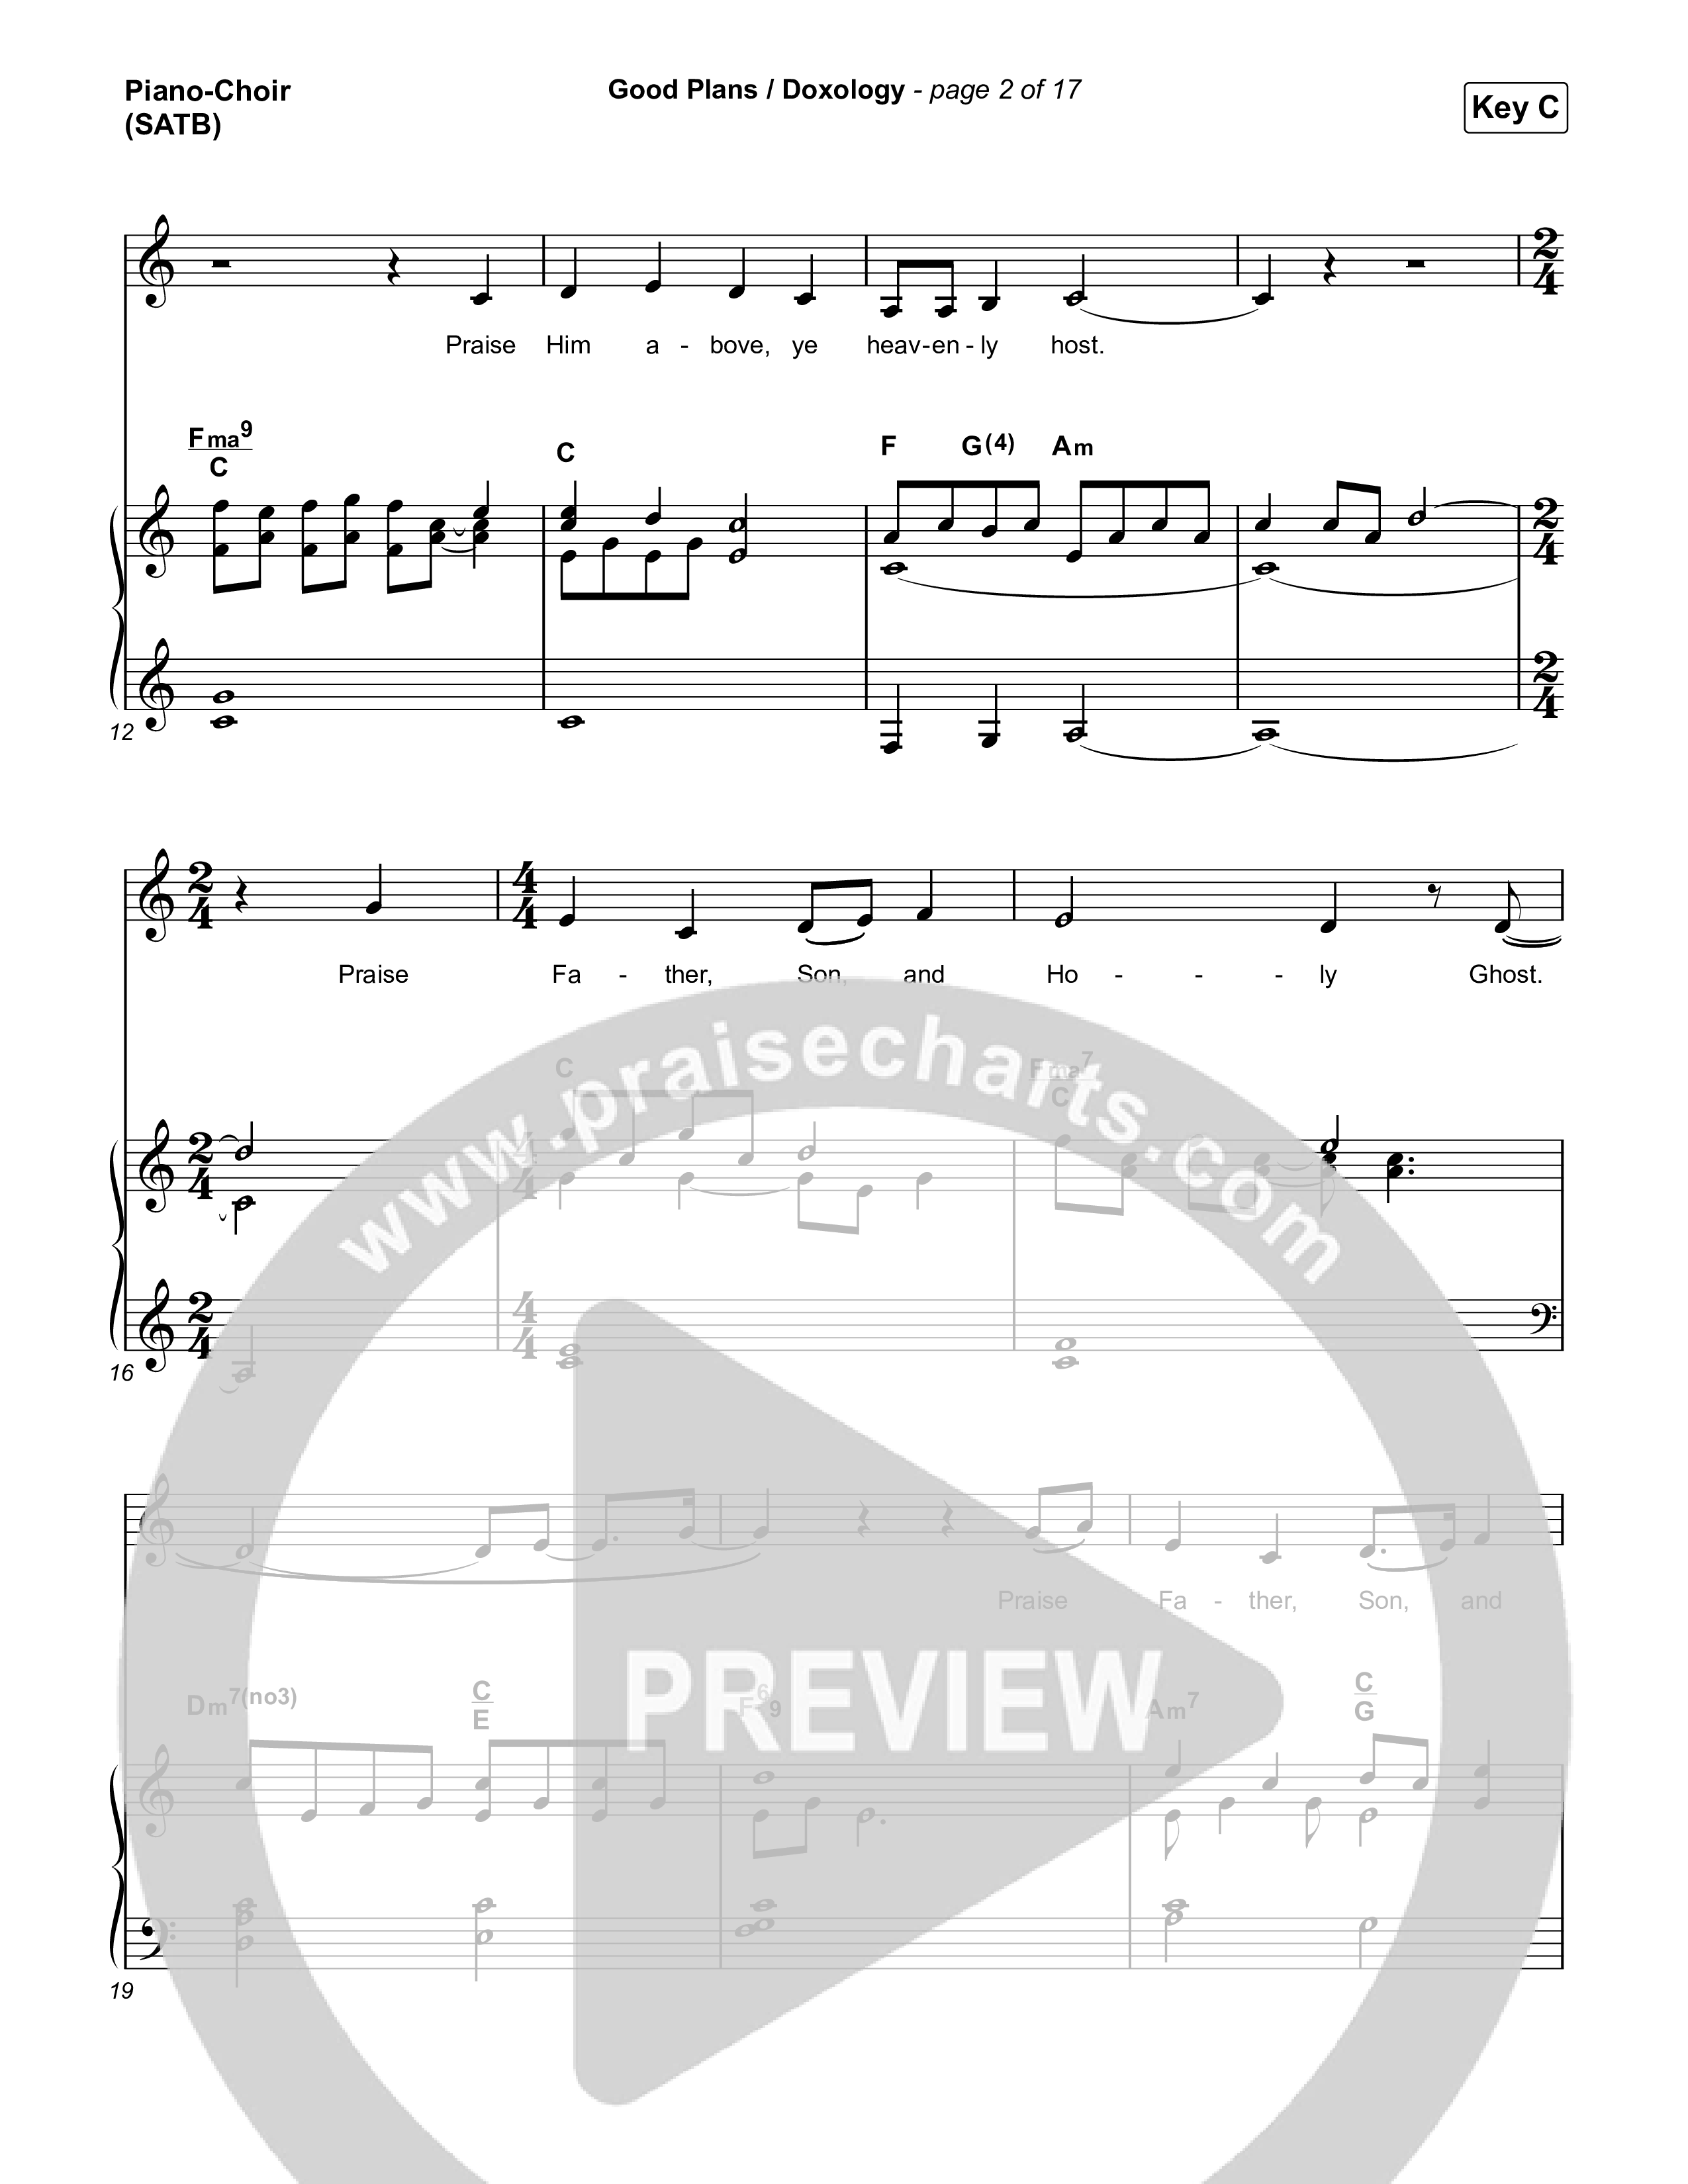 Good Plans/Doxology Piano/Vocal (SATB) (Red Rocks Worship)